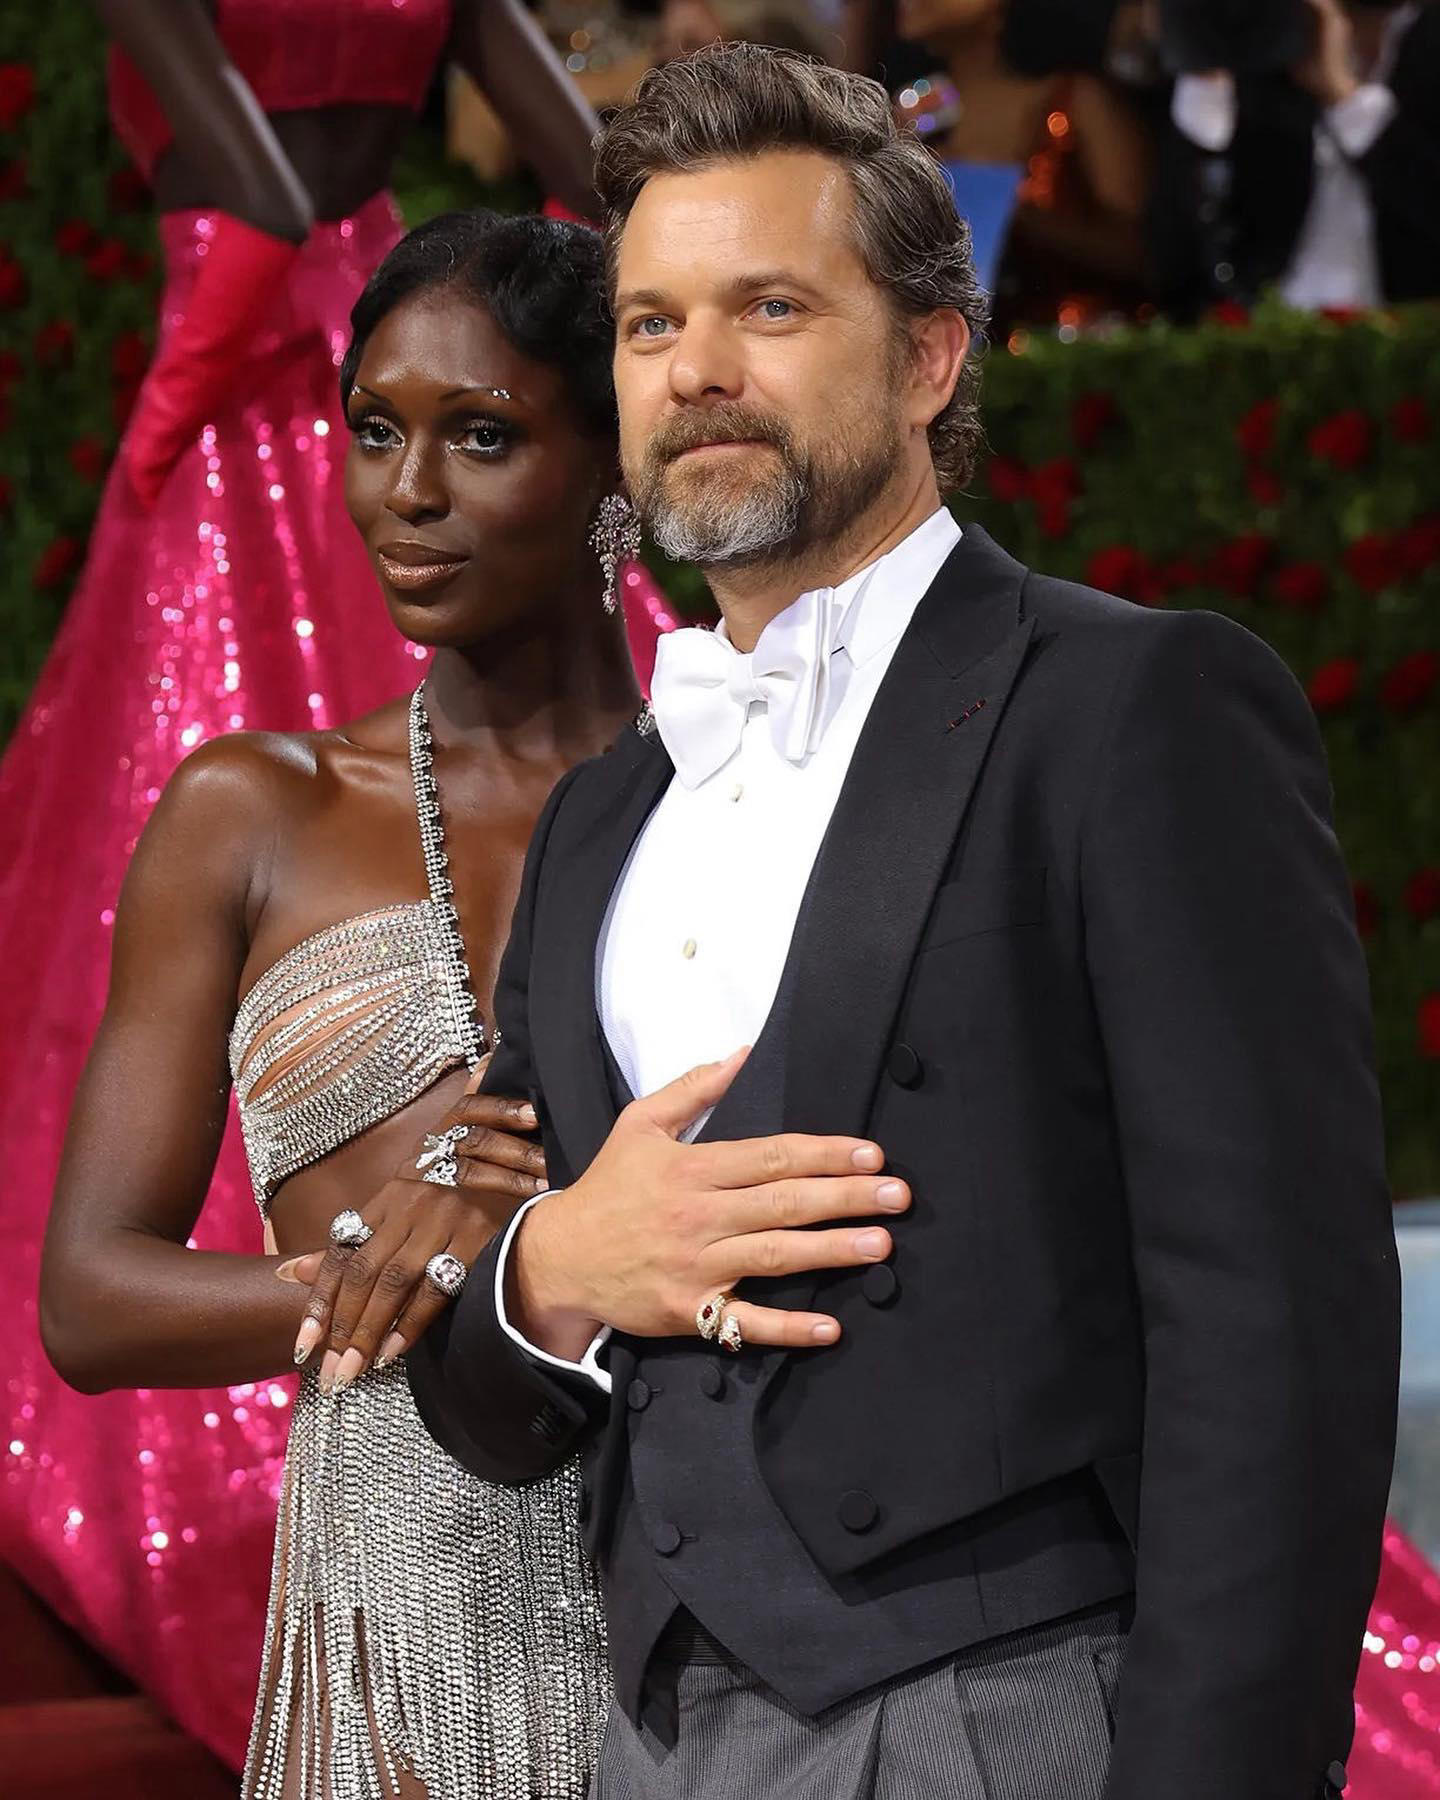 Vanities - Jodie Turner-Smith and Joshua Jackson turned their #MetGala debut into a proper date nigh